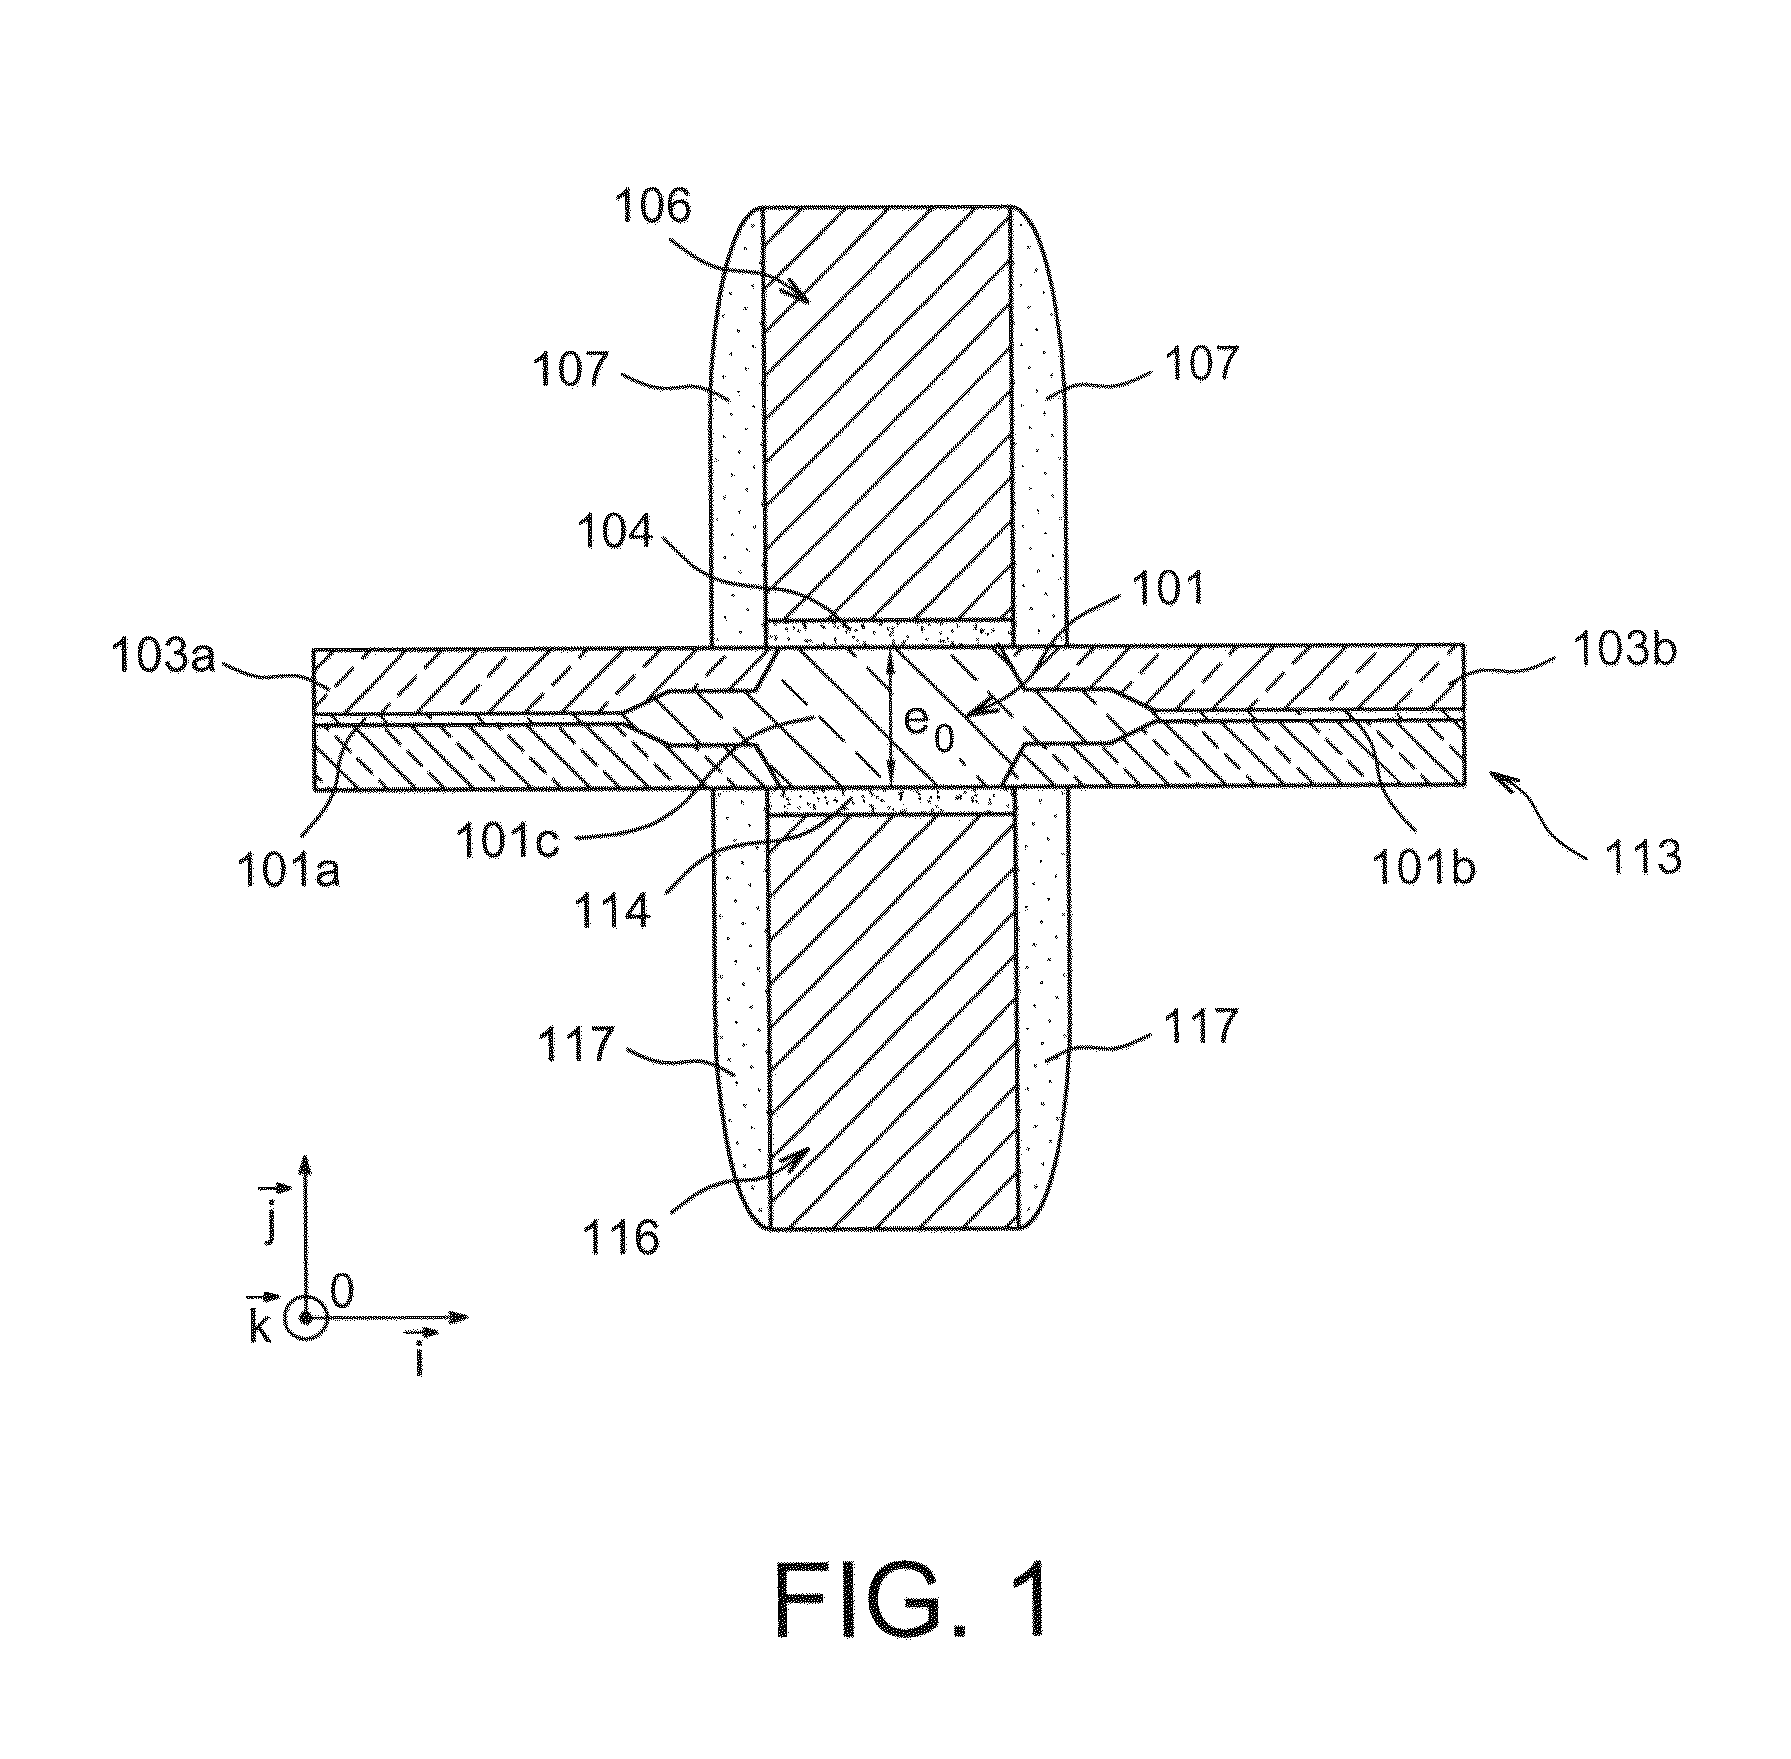 Light-emitting device with head-to-tail P-type and N-type transistors